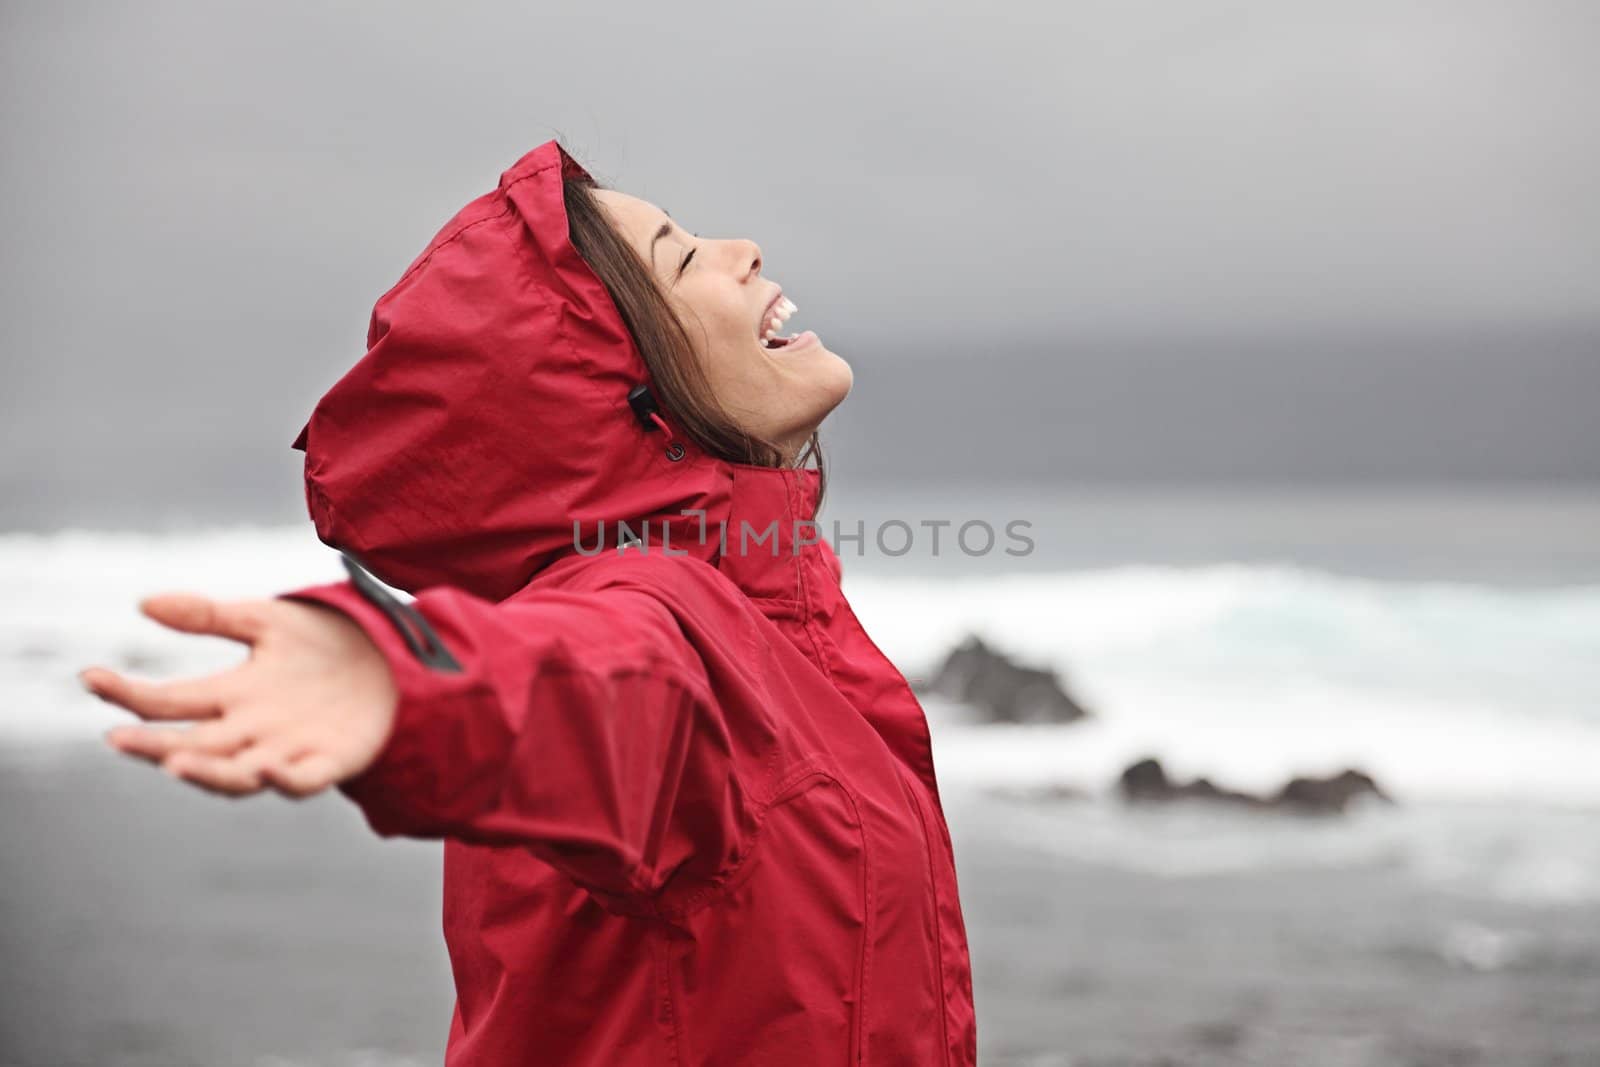 Rain. Woman enjoying a grey rainy fall day on the beach. Young smiling woman in red raincoat.